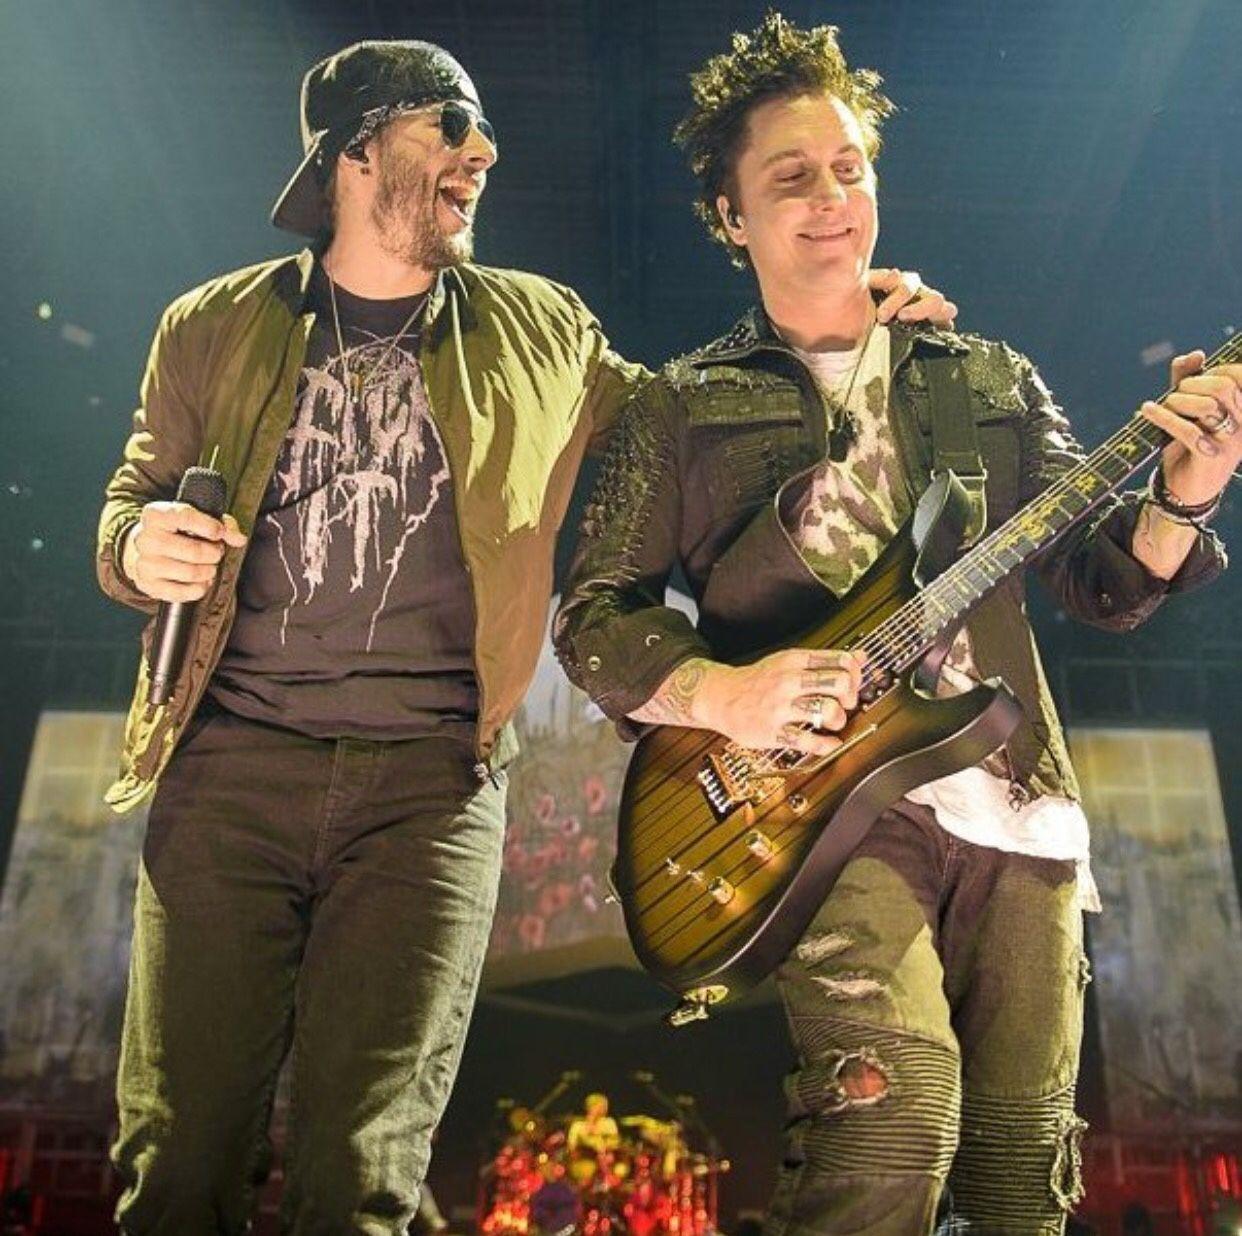 M Shadows & Synyster Gates. Avenged Sevenfold